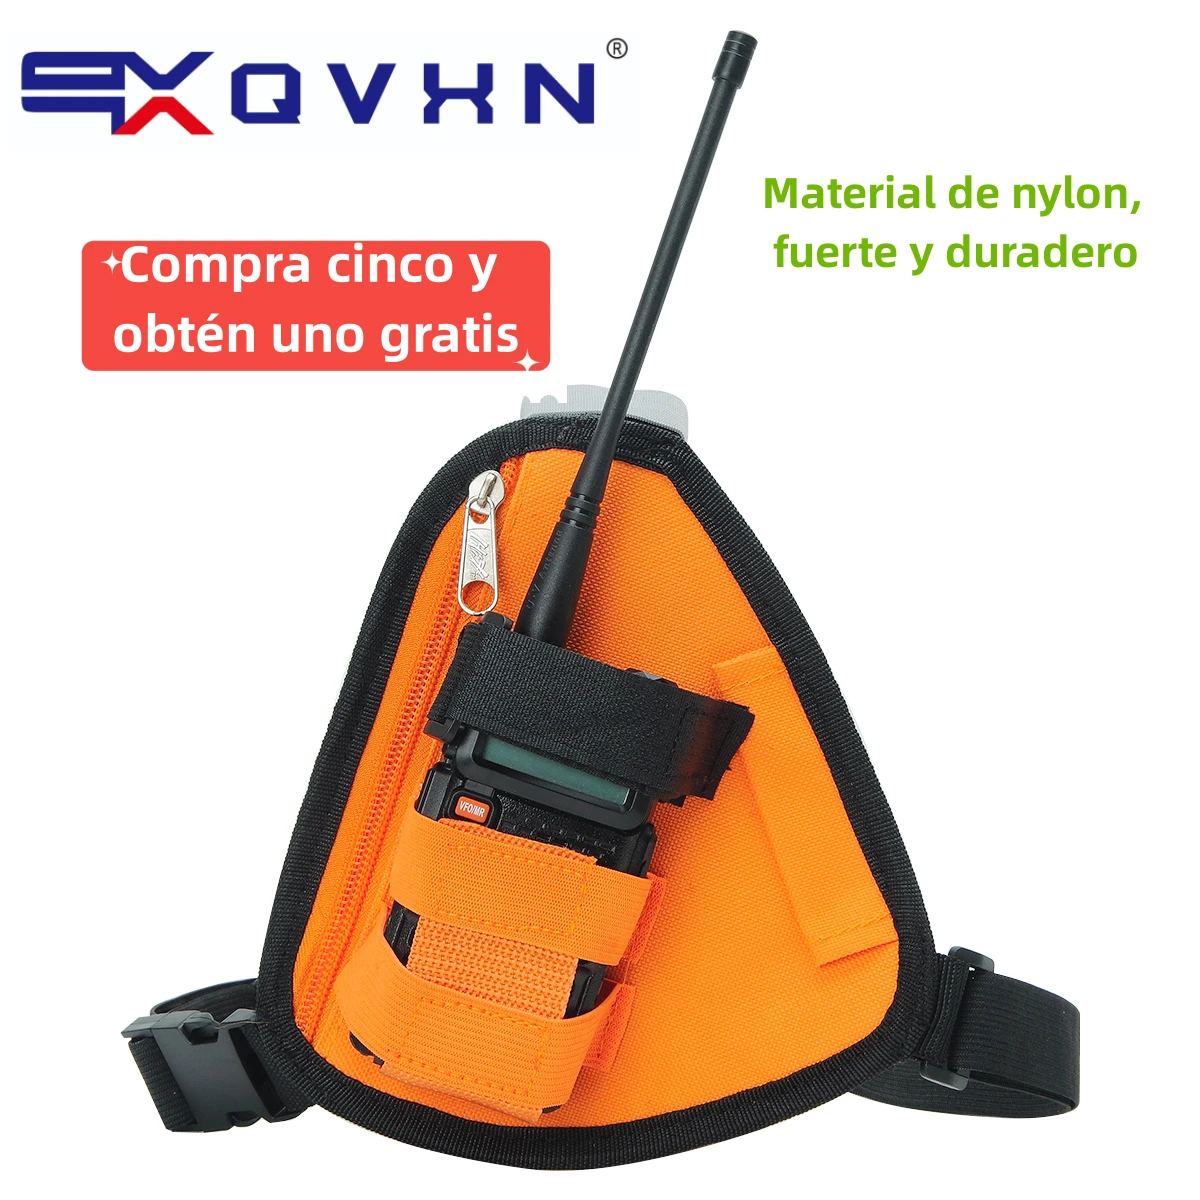 QVXN Handset Chest Hanging Bag  Wireless Handset Cross-body Bag  Search and Rescue Radio Hanging Bag  Walkie-talkie Baofeng